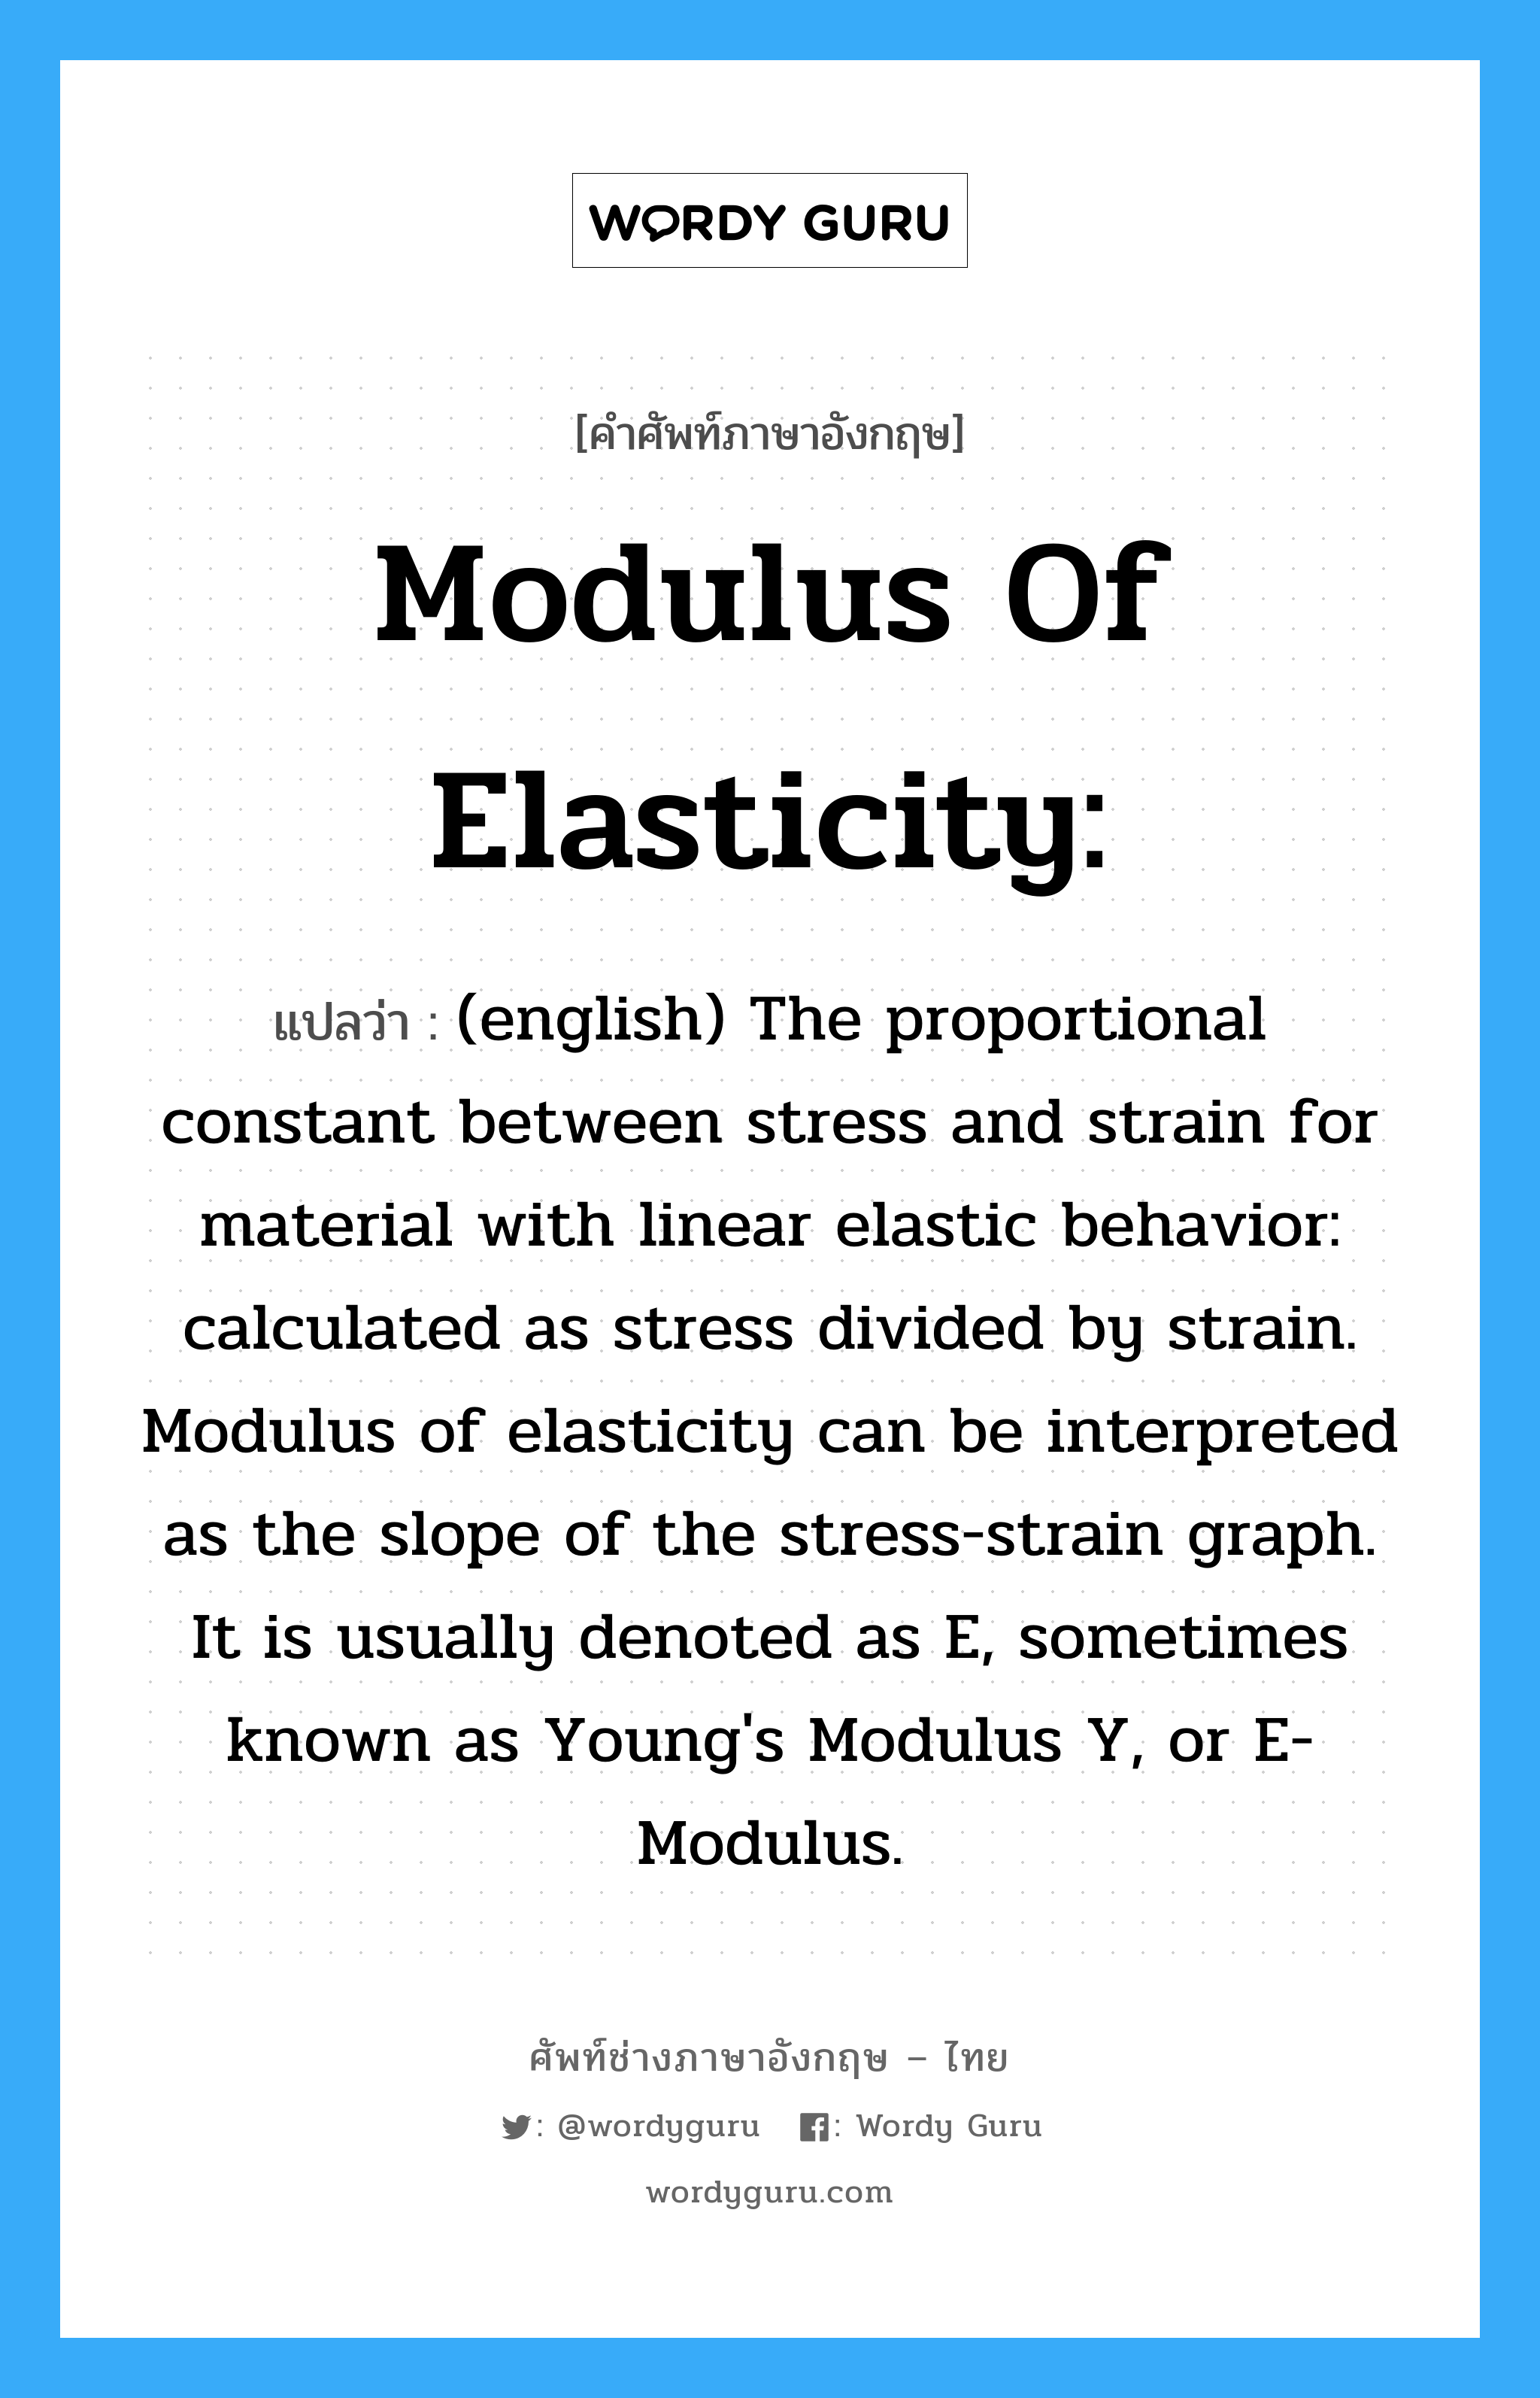 (english) The proportional constant between stress and strain for material with linear elastic behavior: calculated as stress divided by strain. Modulus of elasticity can be interpreted as the slope of the stress-strain graph. It is usually denoted as E, sometimes known as Young's Modulus Y, or E-Modulus. ภาษาอังกฤษ?, คำศัพท์ช่างภาษาอังกฤษ - ไทย (english) The proportional constant between stress and strain for material with linear elastic behavior: calculated as stress divided by strain. Modulus of elasticity can be interpreted as the slope of the stress-strain graph. It is usually denoted as E, sometimes known as Young's Modulus Y, or E-Modulus. คำศัพท์ภาษาอังกฤษ (english) The proportional constant between stress and strain for material with linear elastic behavior: calculated as stress divided by strain. Modulus of elasticity can be interpreted as the slope of the stress-strain graph. It is usually denoted as E, sometimes known as Young's Modulus Y, or E-Modulus. แปลว่า Modulus of elasticity: